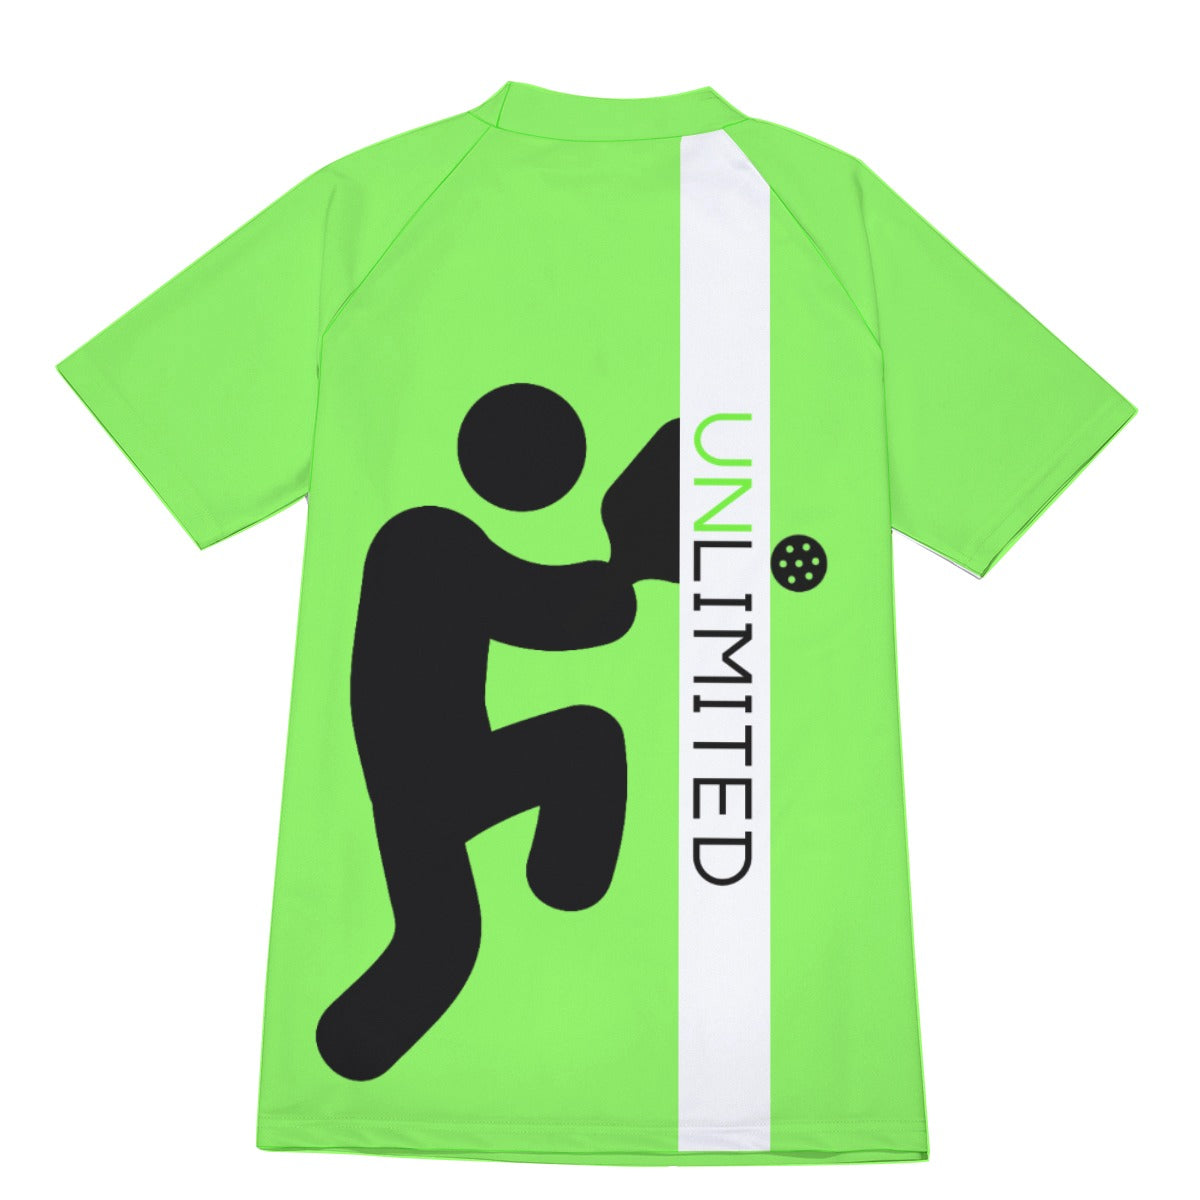 UNLIMITED - Men's Pickleball Fitted T-Shirt by Dizzy Pickle